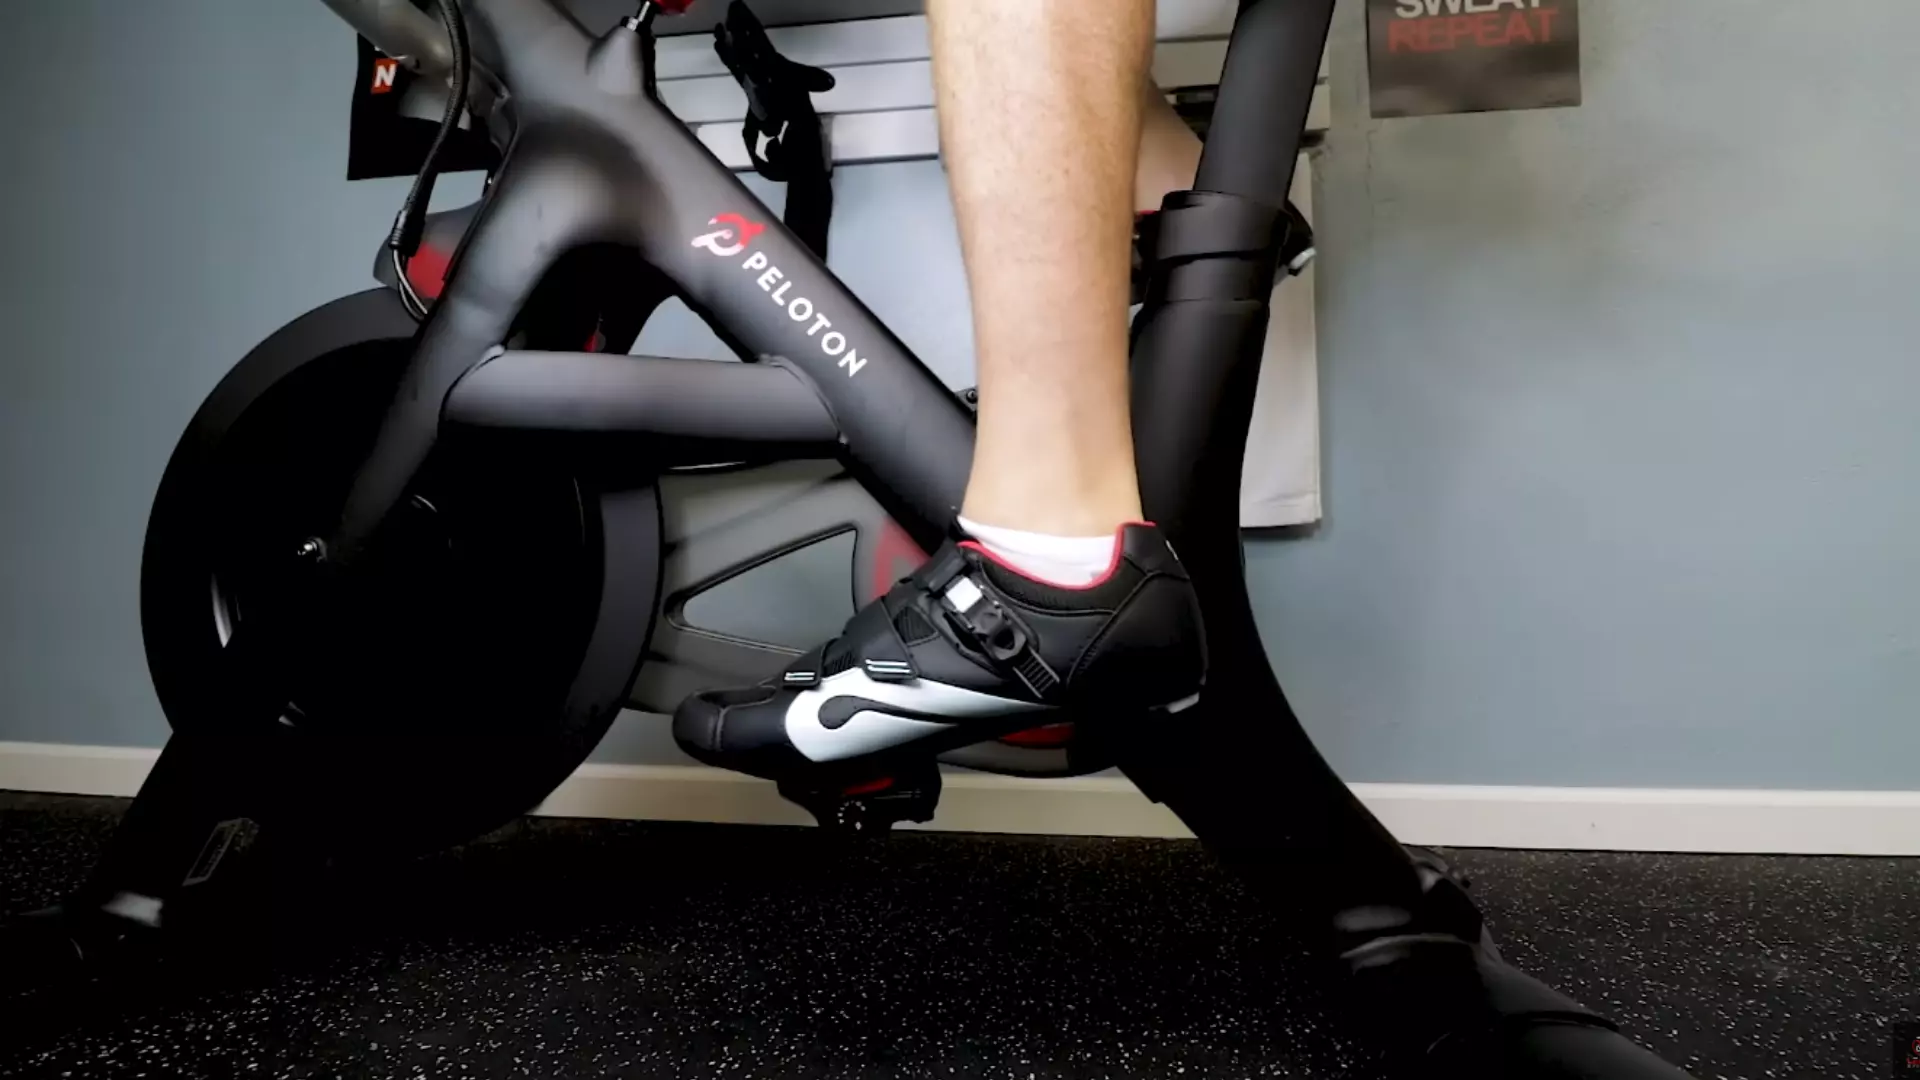 How To Take Off Peloton Shoes After a Workout